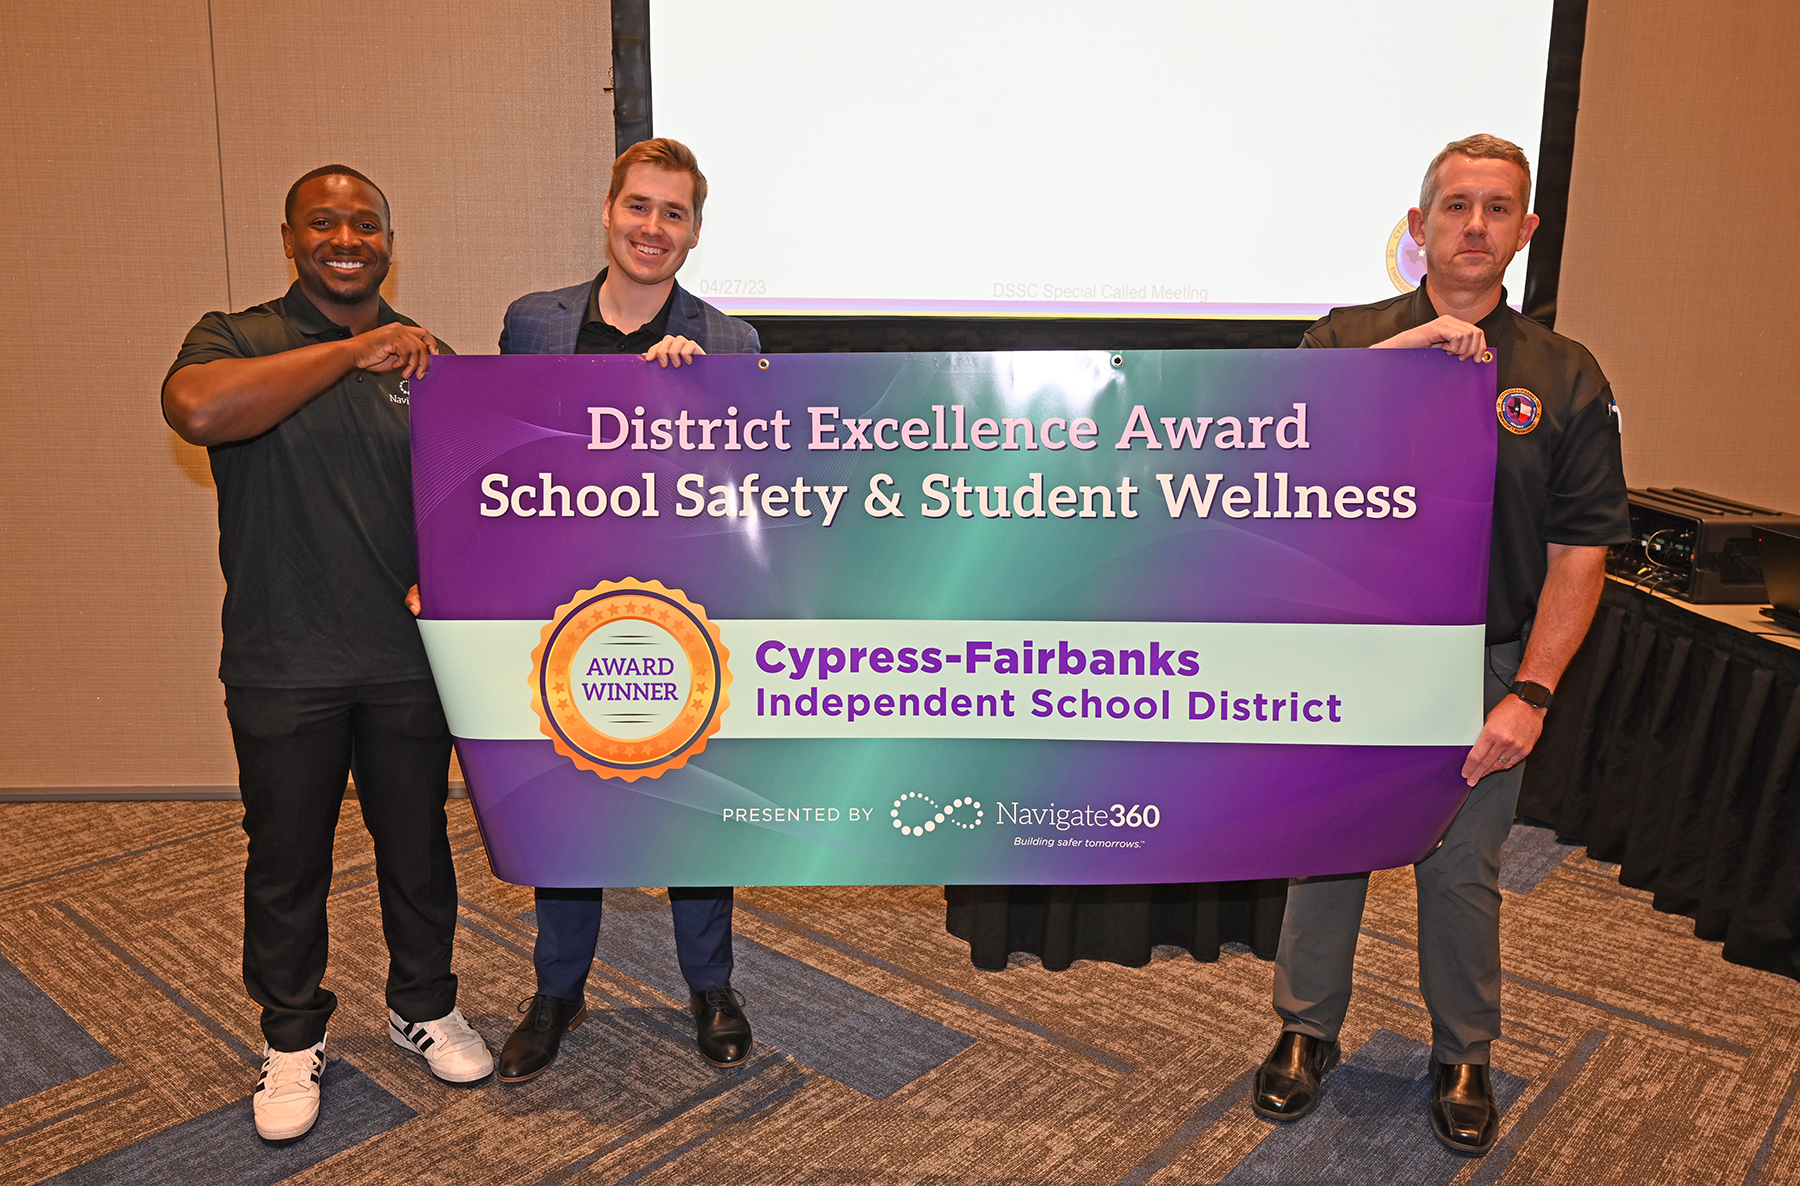 CFISD Recognized for Excellence in School Safety, Student Wellness